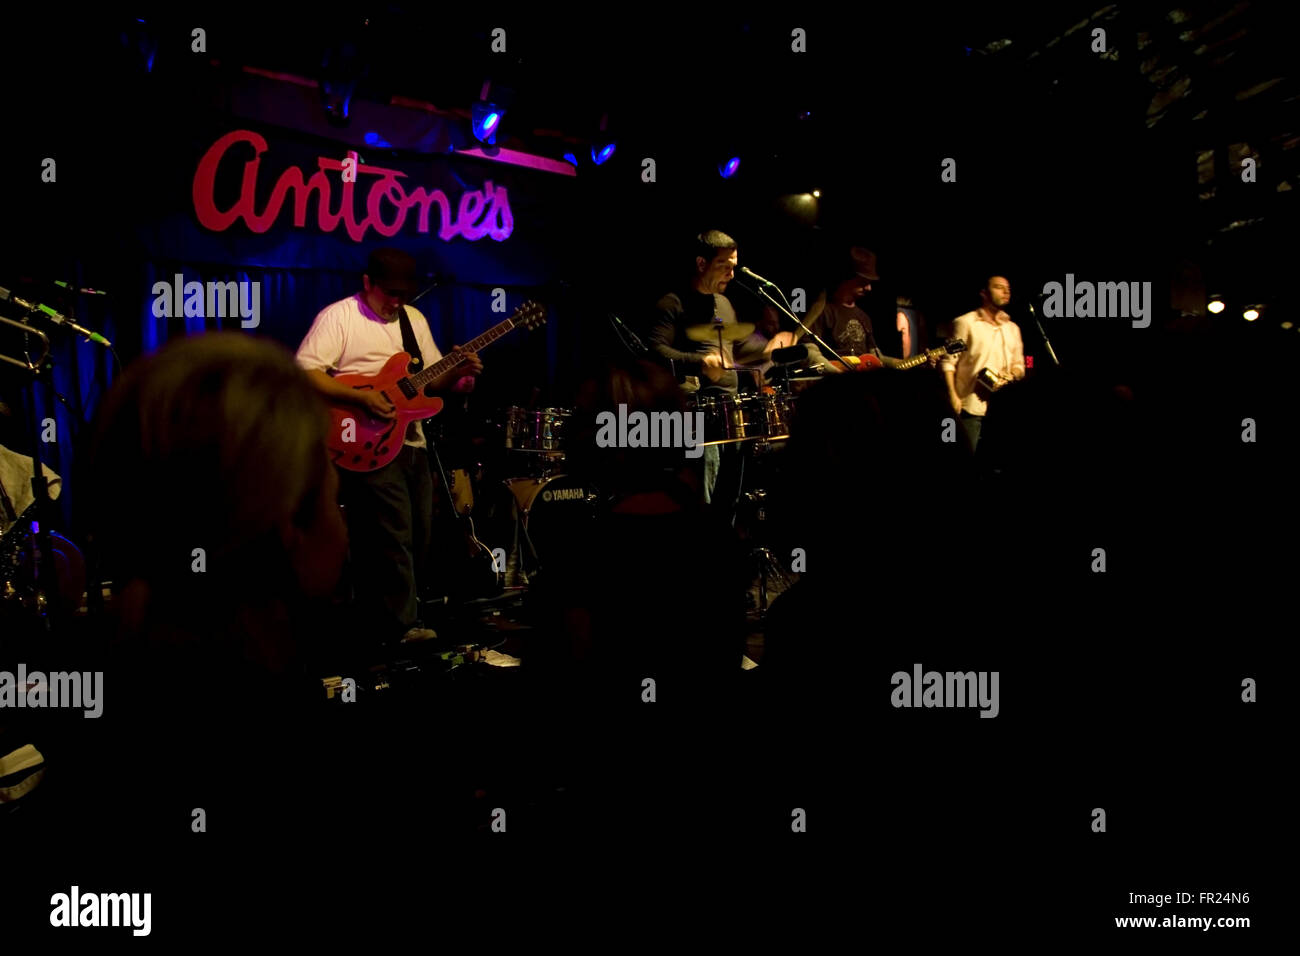 A landmark on the Austin music scene, Antone's Home of the Blues hosts a wave of cutting edge bands. Stock Photo